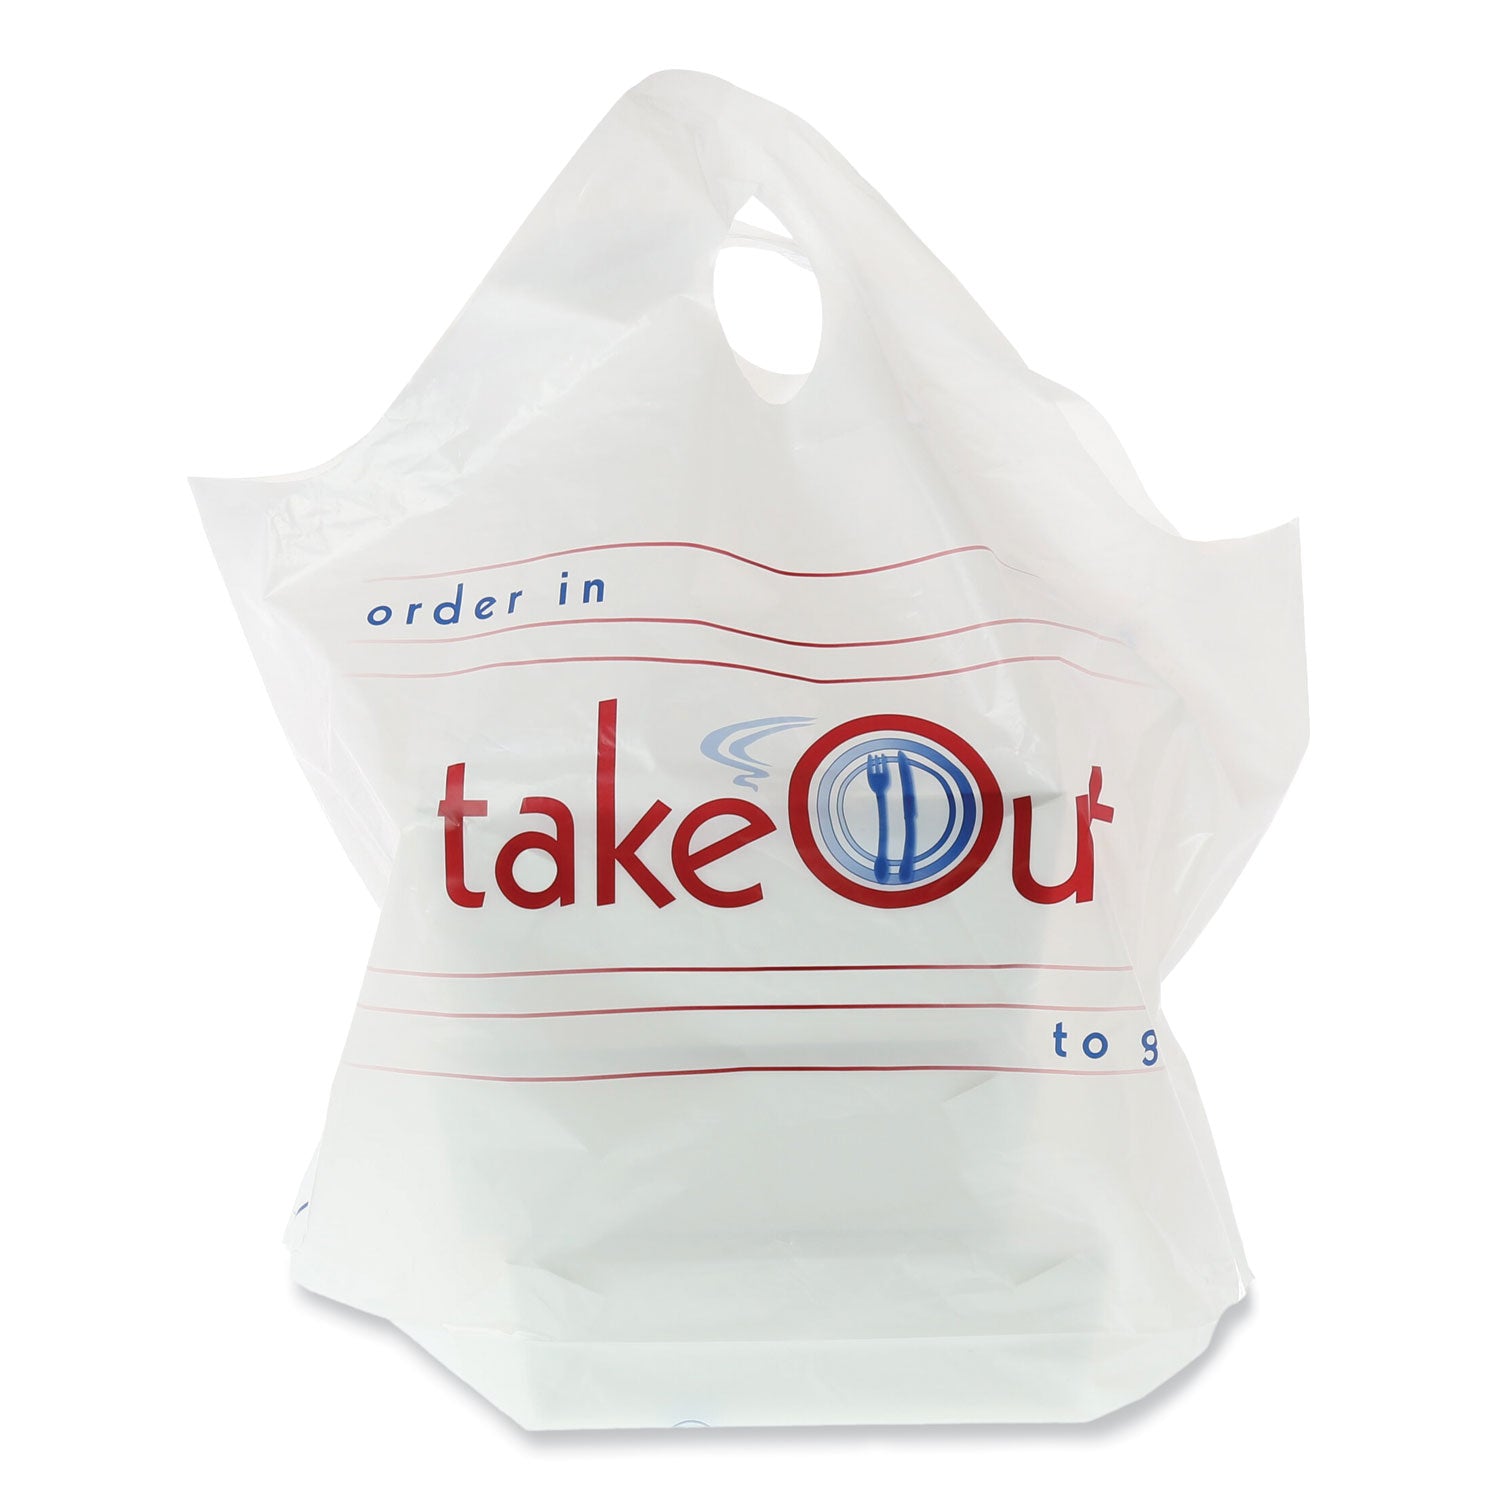 wave-top-to-go-bags-19-x-95-x-19-white-with-red-print-500-carton_rpprpwb1919 - 2